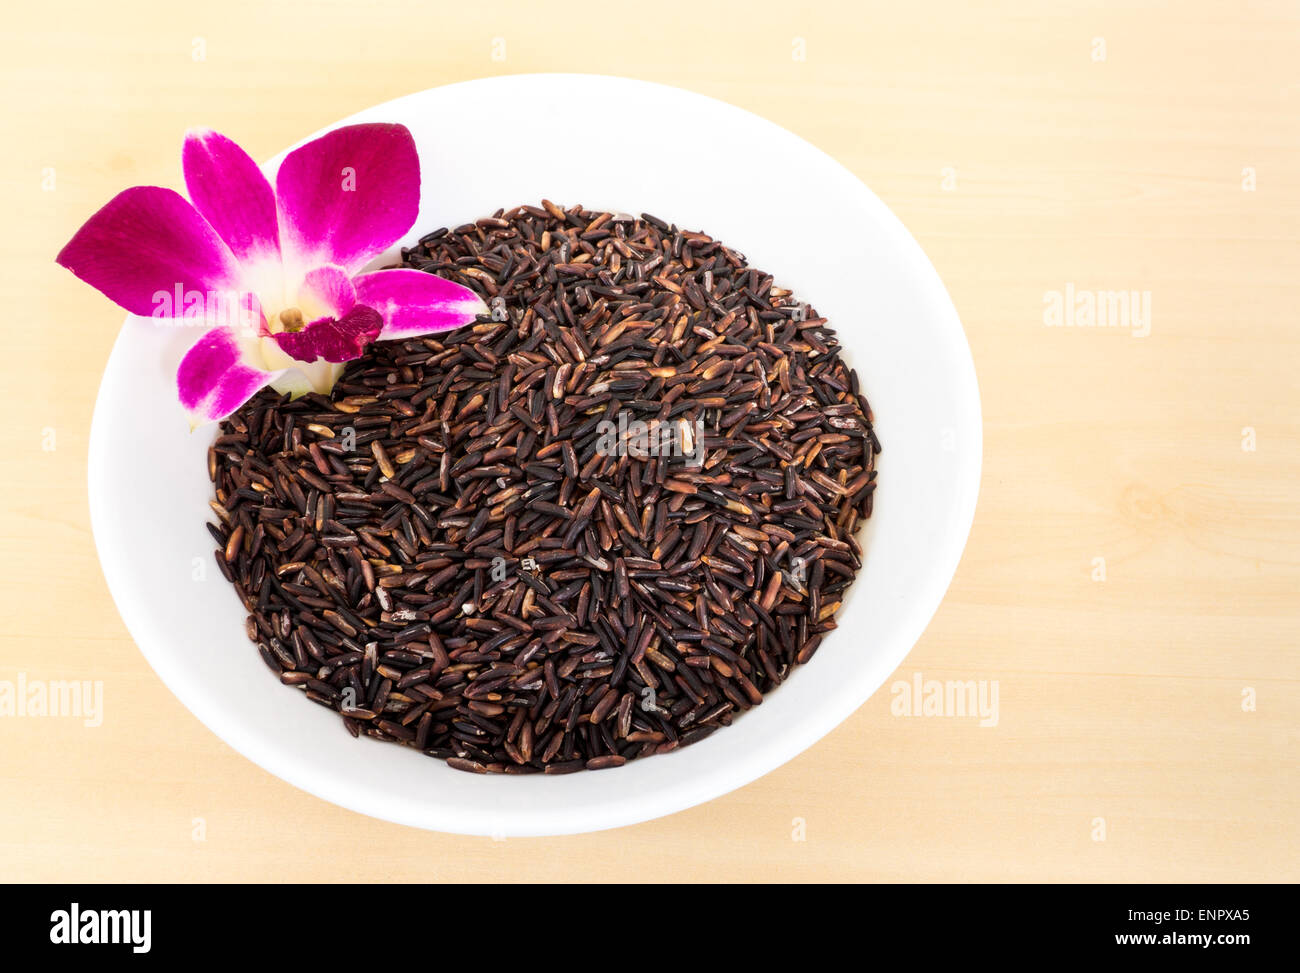 Brown Jasmine Rice with Orchid Flower in a White Bowl Stock Photo